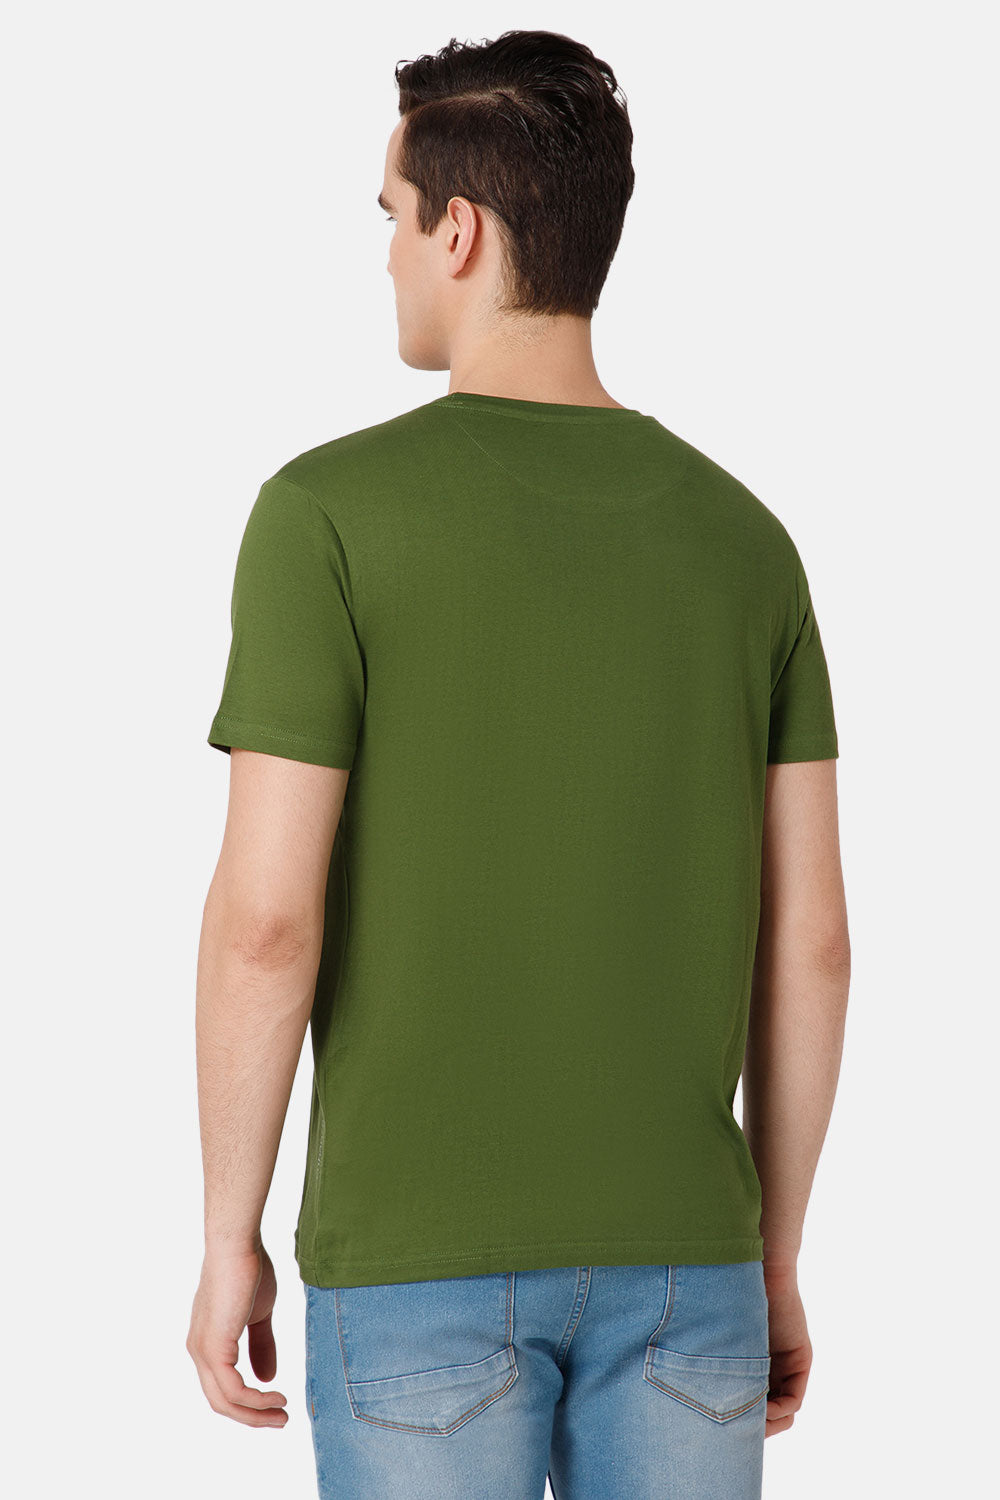 Enhance Printed Crew Neck Men's Casual T-Shirts - Olive - TS14